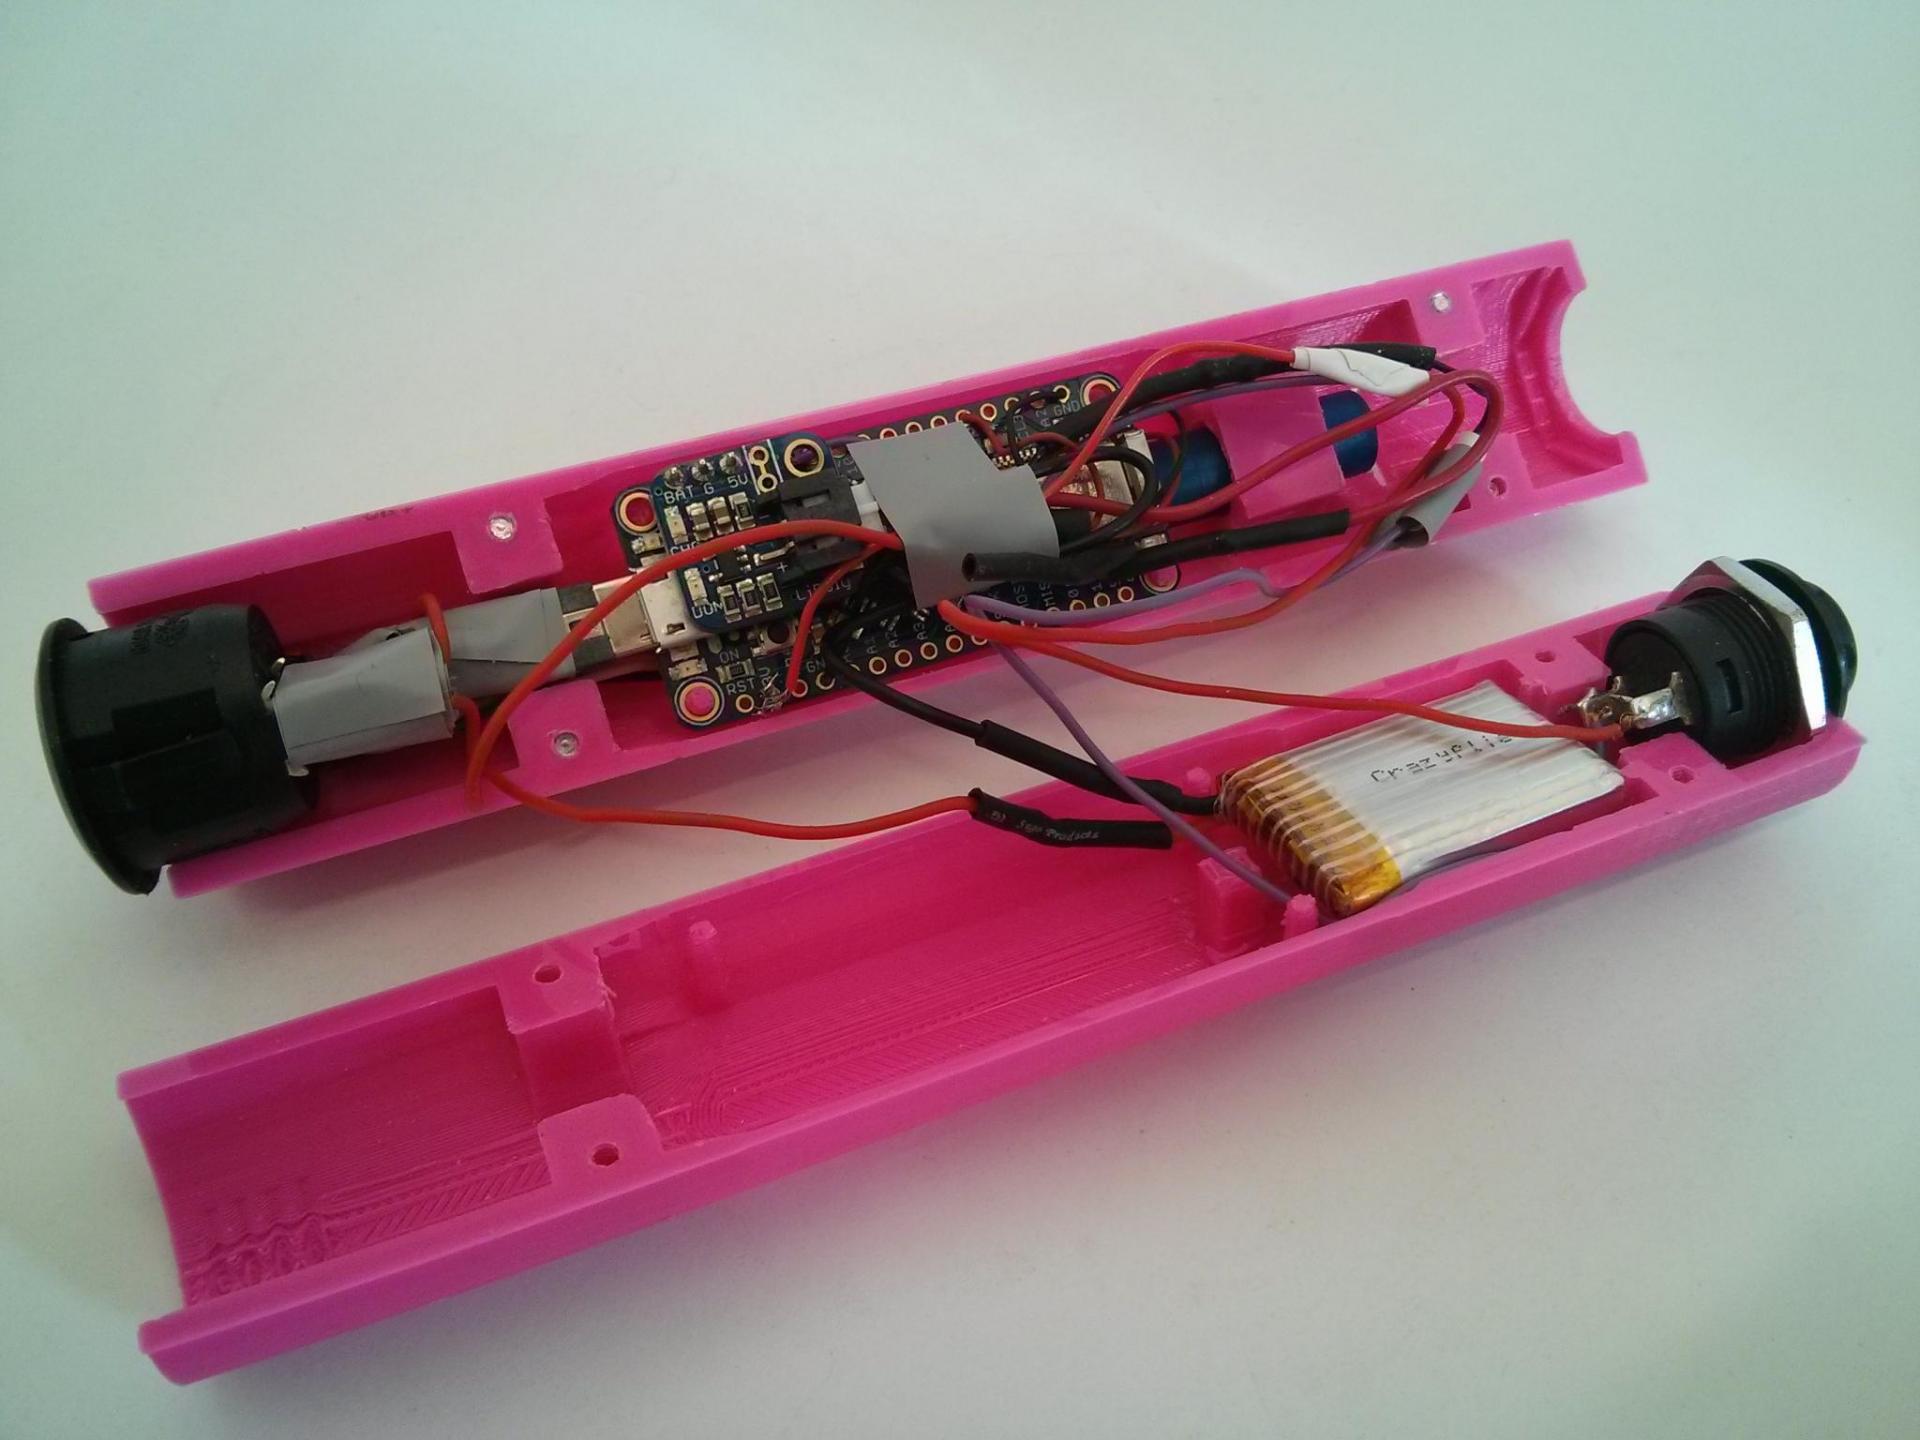 The intérieur of the final Vibrette prototype, showing the vibration motor, the arduino, buttons, and cables.